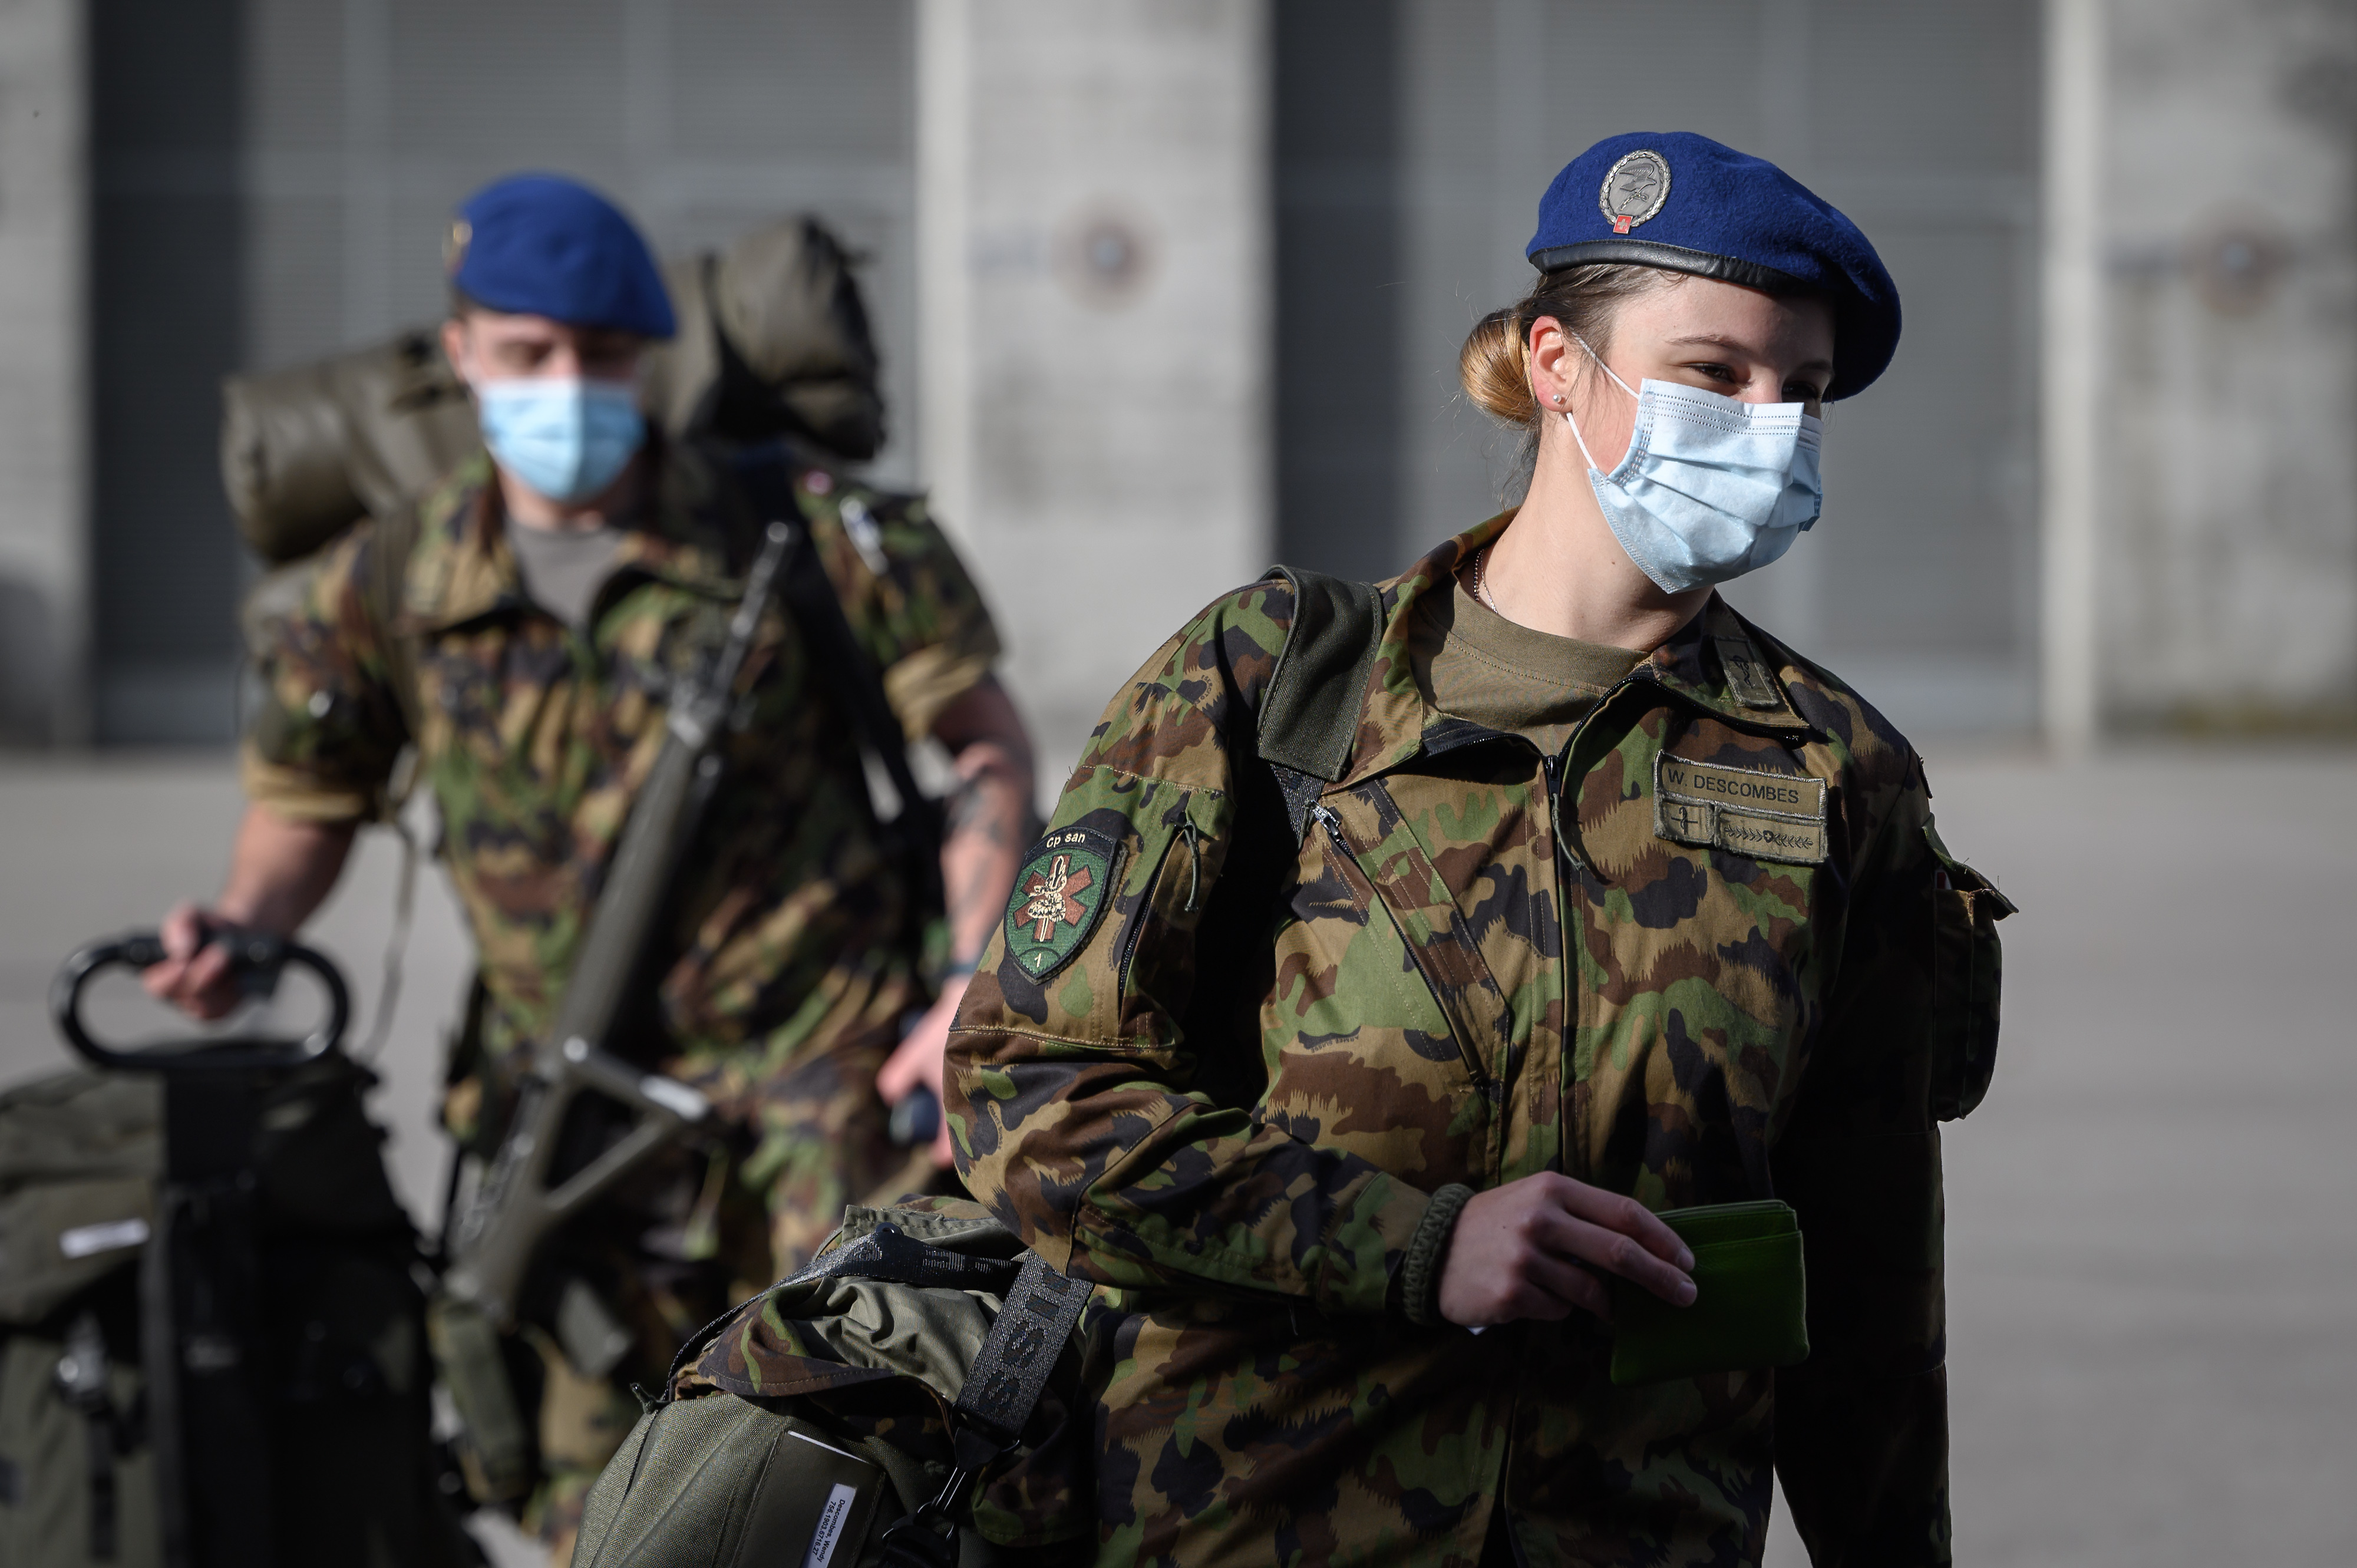 The Swiss Army Will Provide Women Soldiers With Women’s Underwear Instead Of Men’s For The First Time